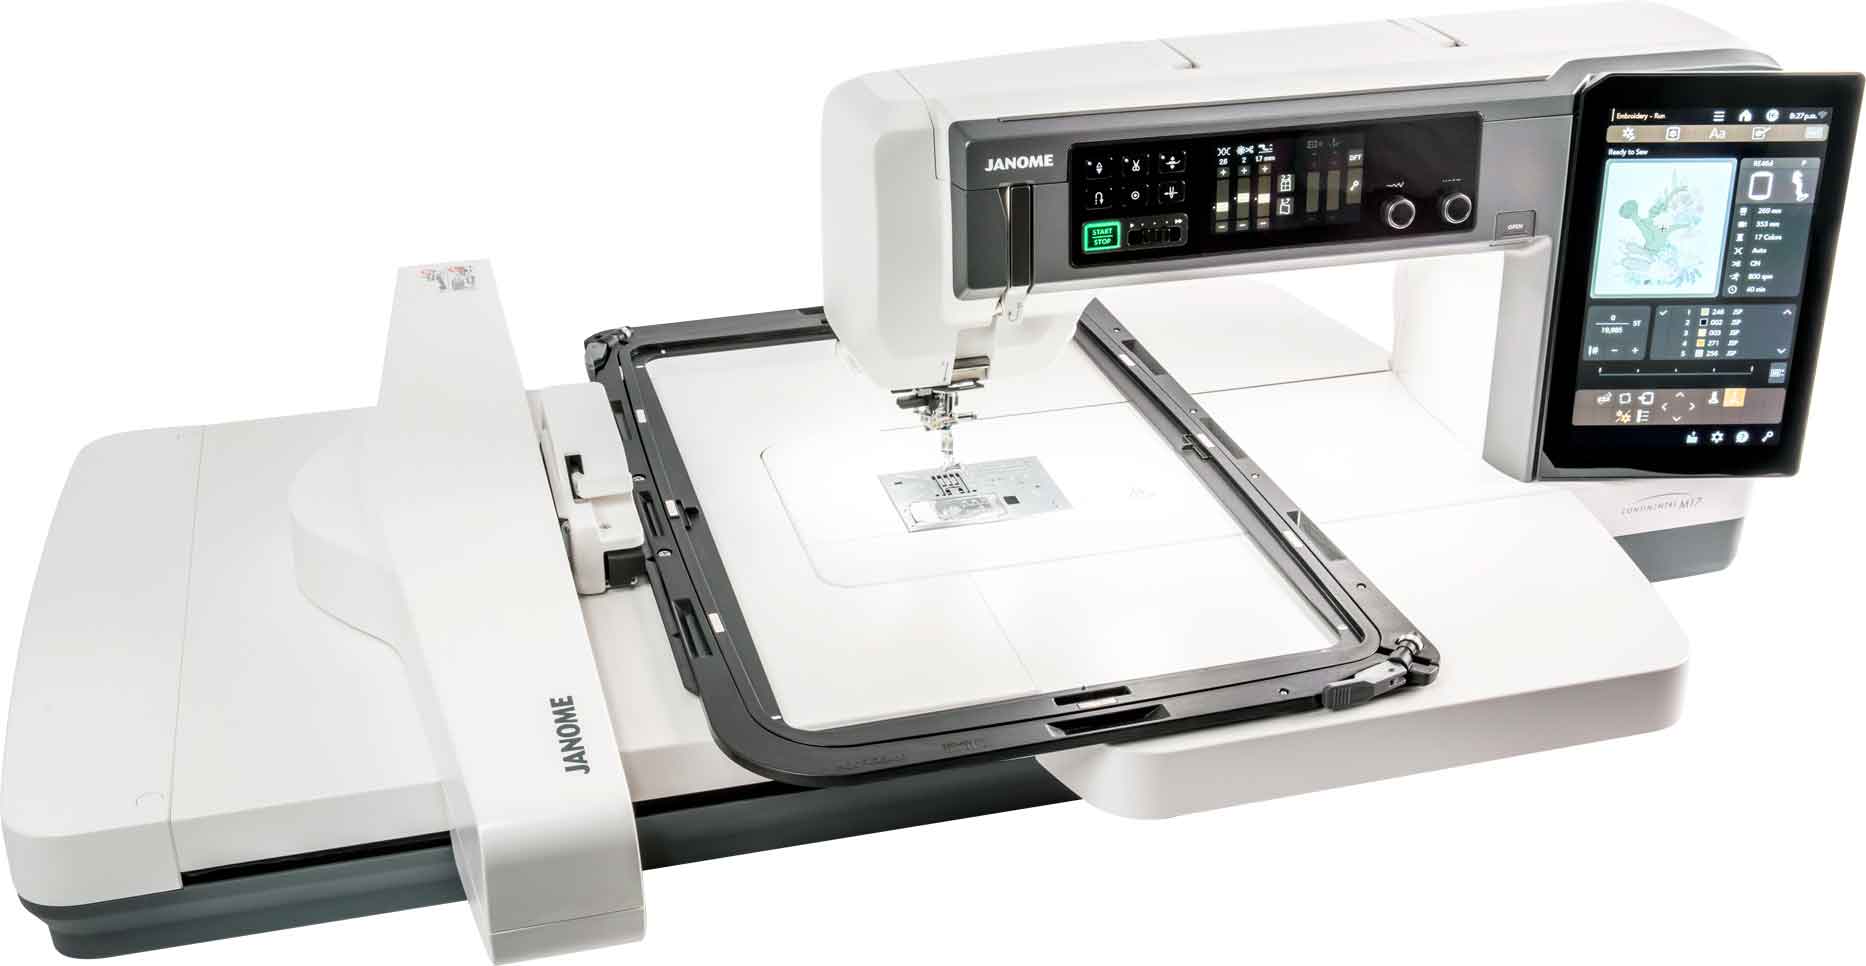 image of the Janome Continental M17 Sewing and Embroidery Machine with embroidery hoop attached